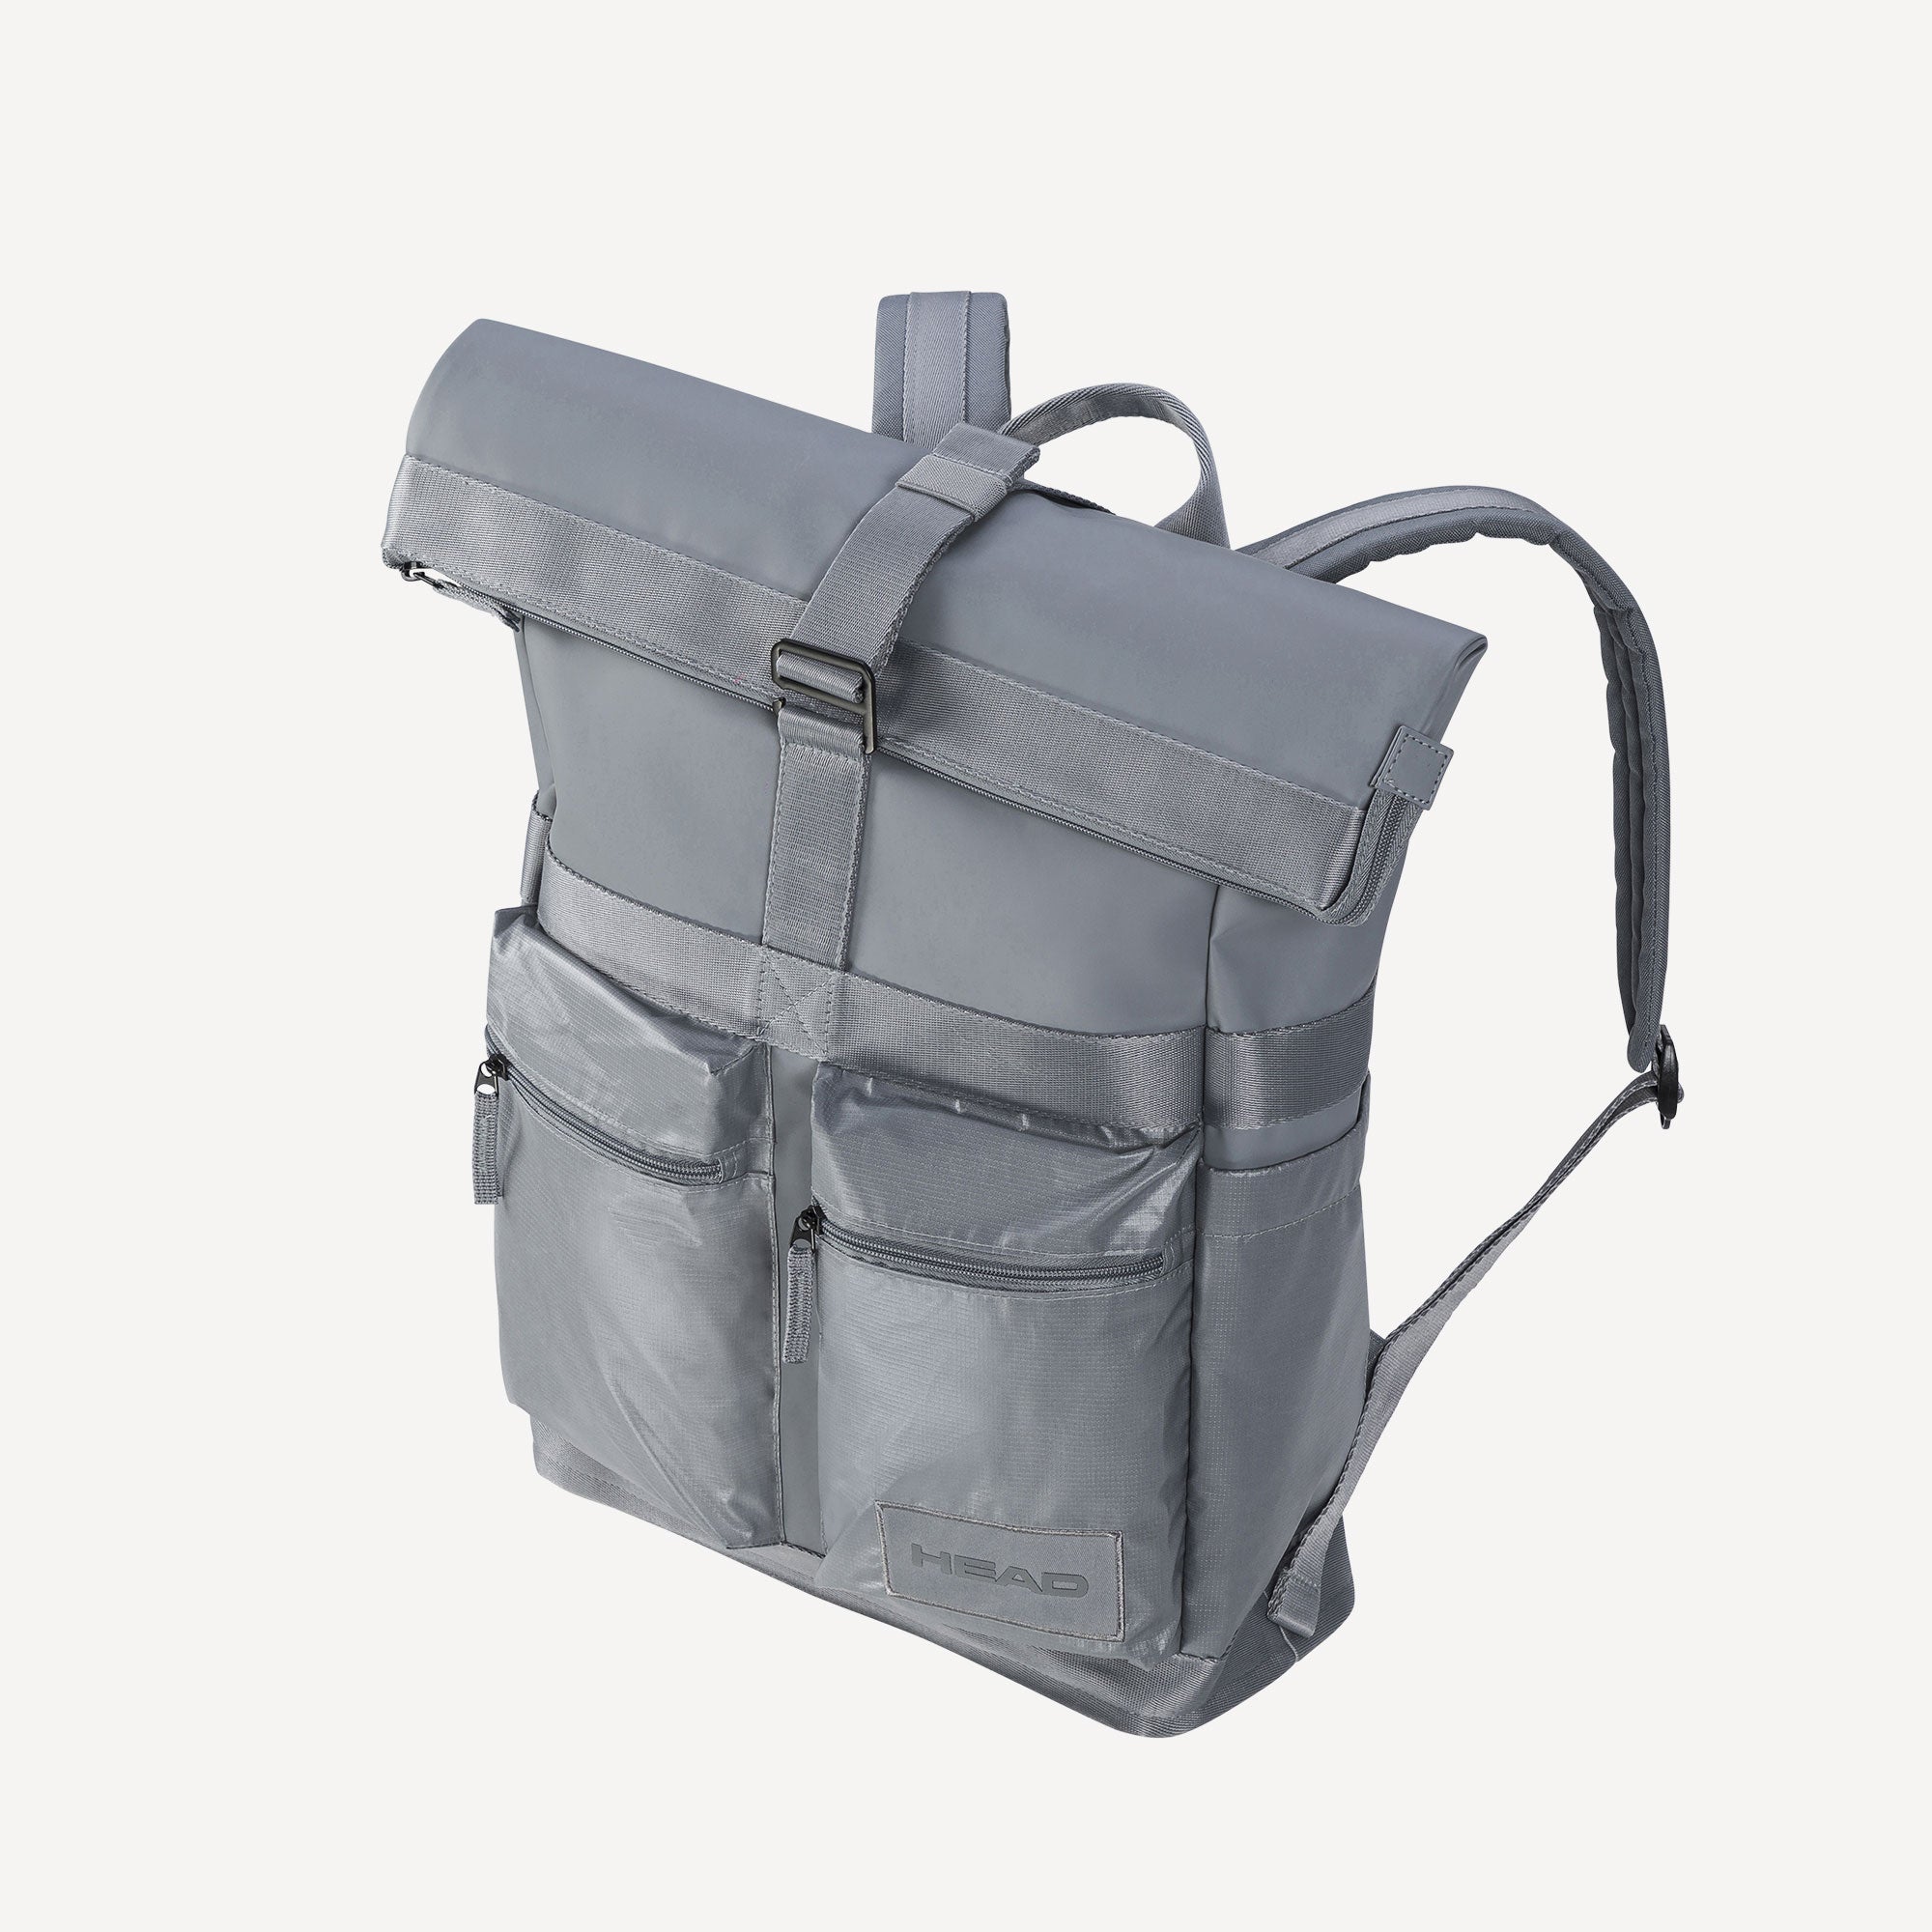 HEAD Coco Tour Tennis Backpack 30L - Grey (1)